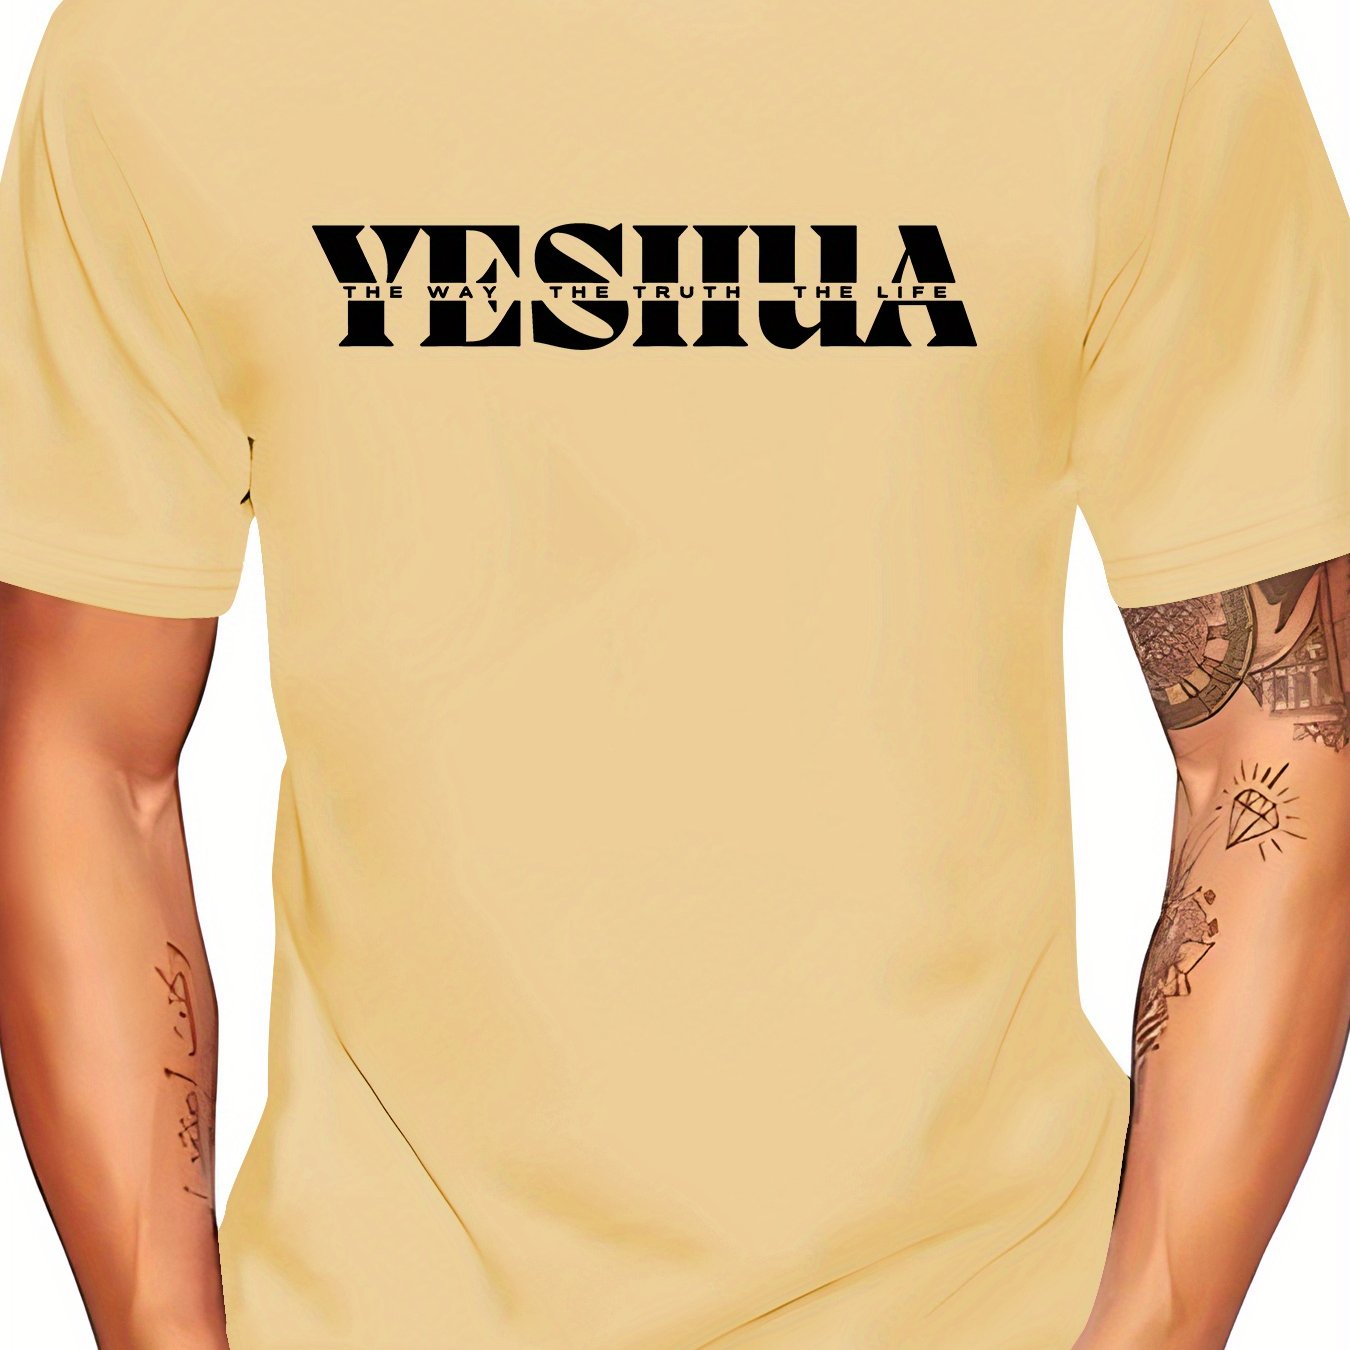 Yeshua The Way The Truth The Life Men's Christian T-shirt claimedbygoddesigns